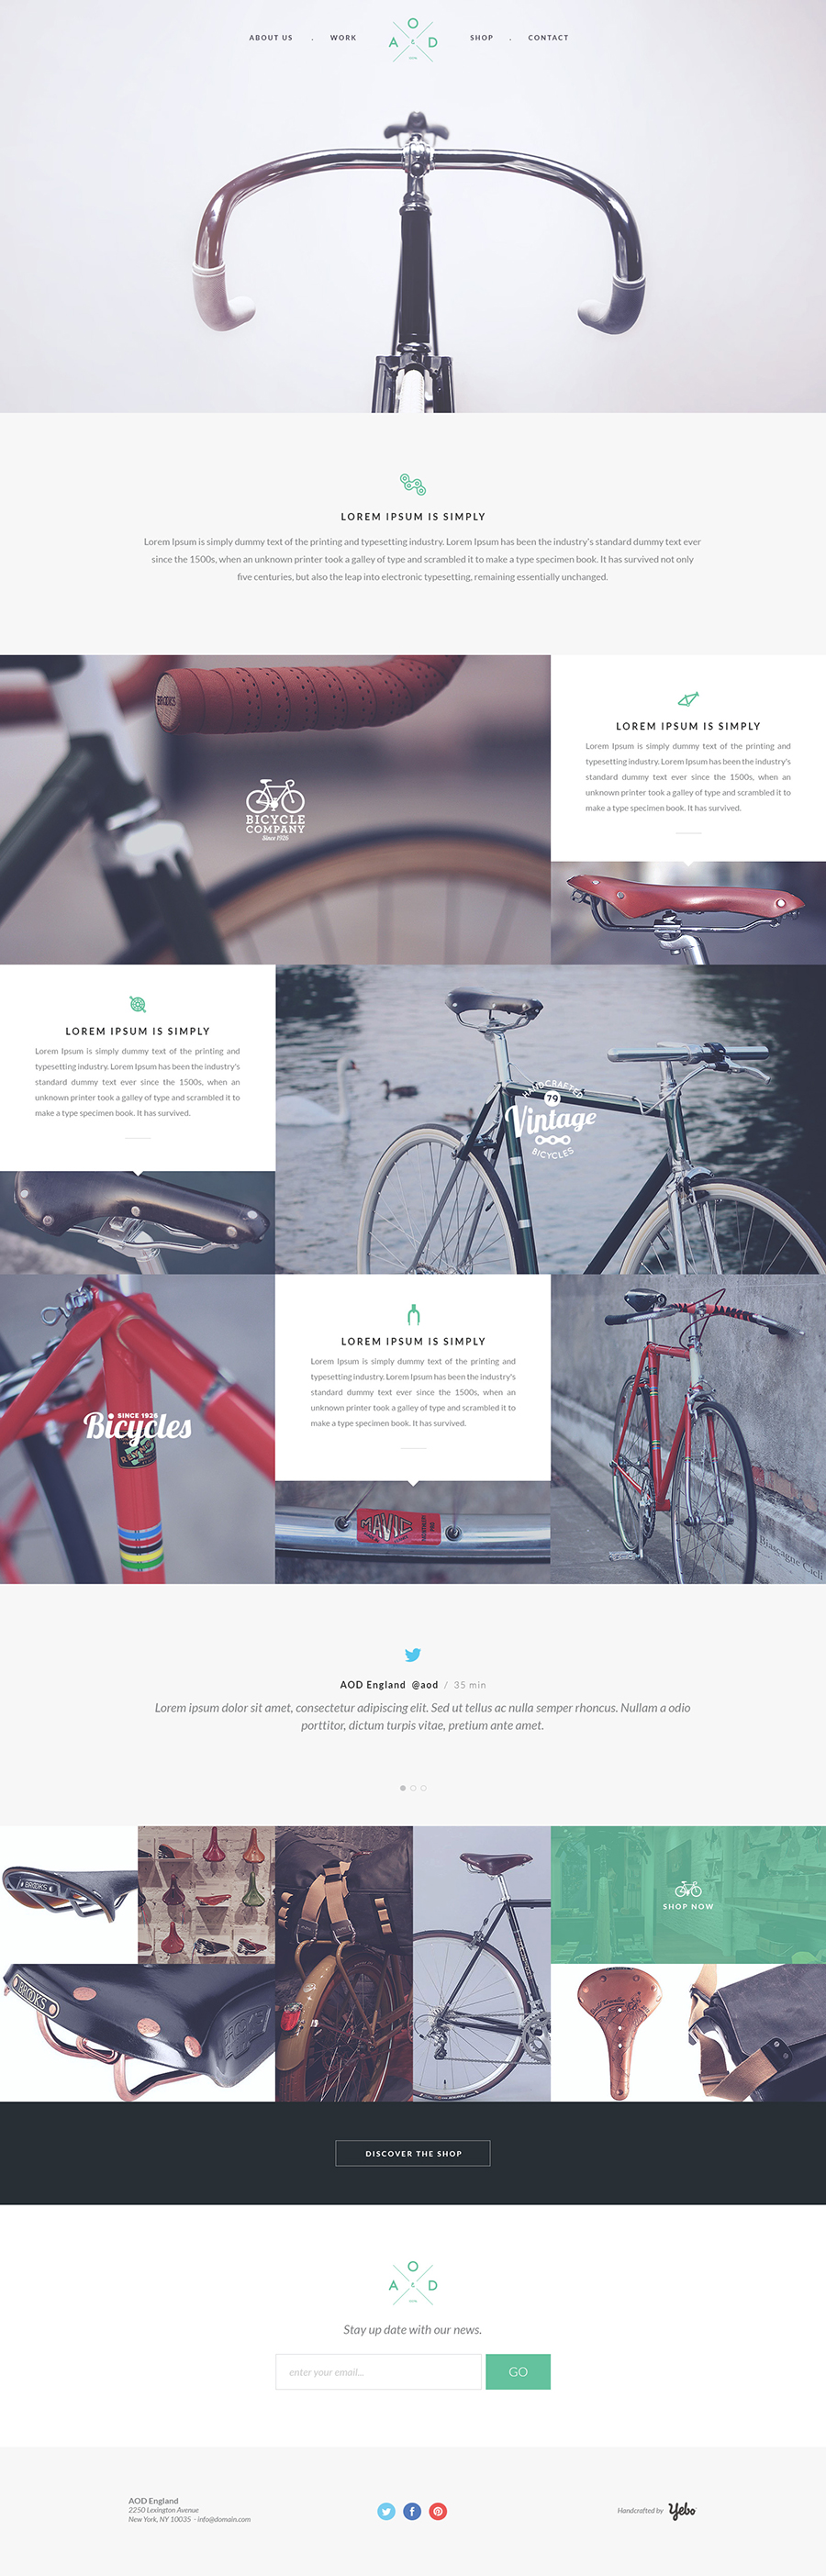 Bicycle. Free Onepage Photoshop Template by Yebo!